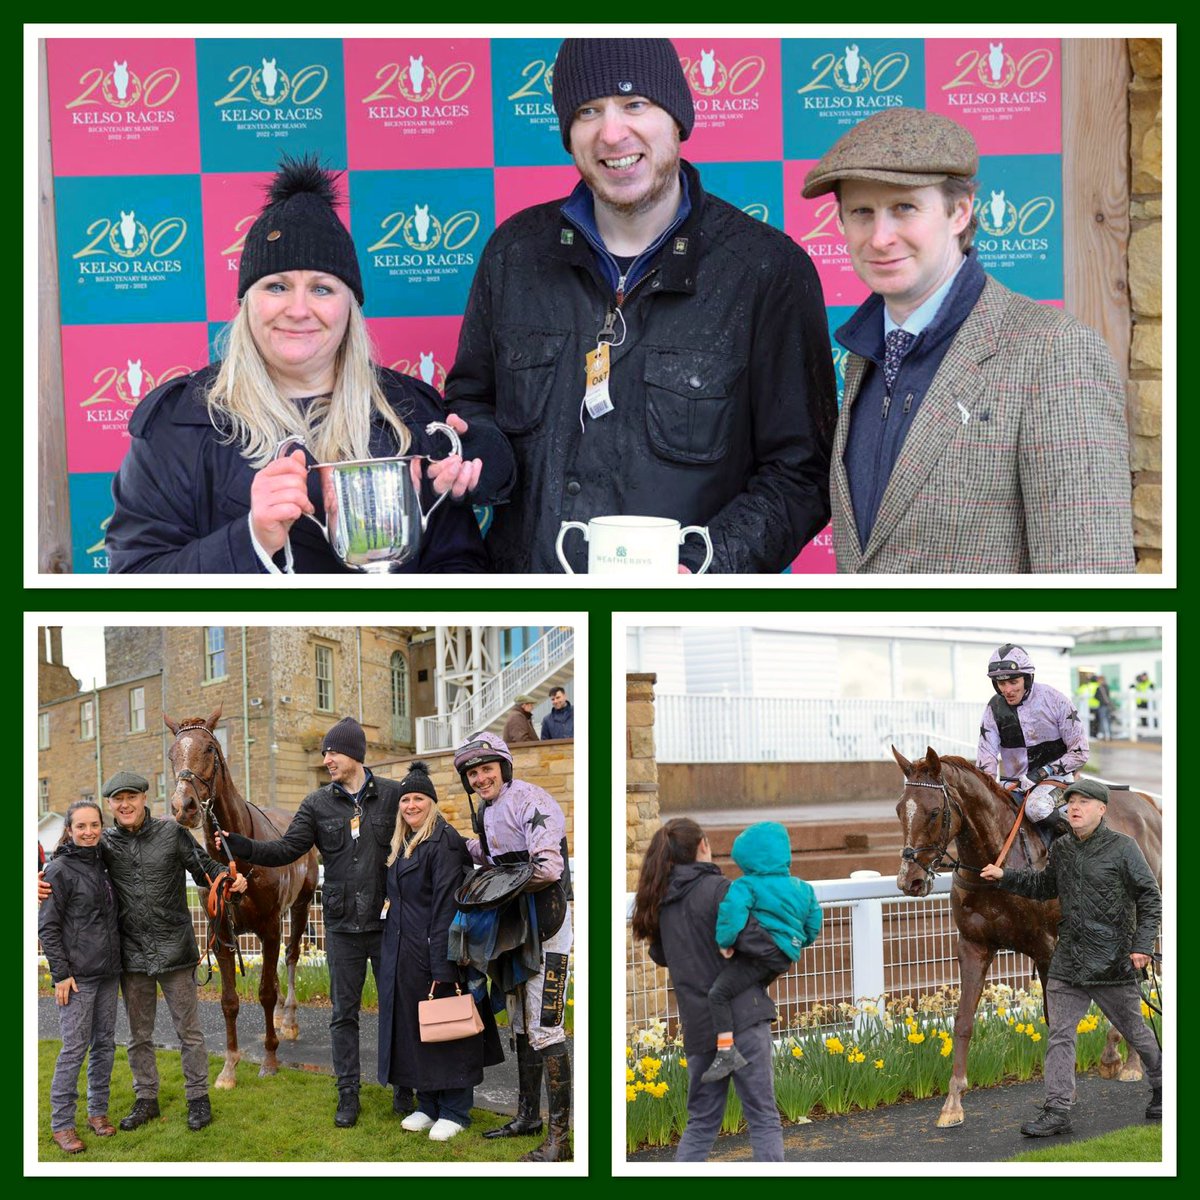 Soldier Of Rock under Joe Wright ran out an easy 15 length winner of the Weatherbys Hamilton Buccleuch Cup @KelsoRacecourse. Congratulations to Joe along with the Gold And Silver Club & Courtney Tinkler. James Innes from the WH Edinburgh Office was on hand to present the trophy.